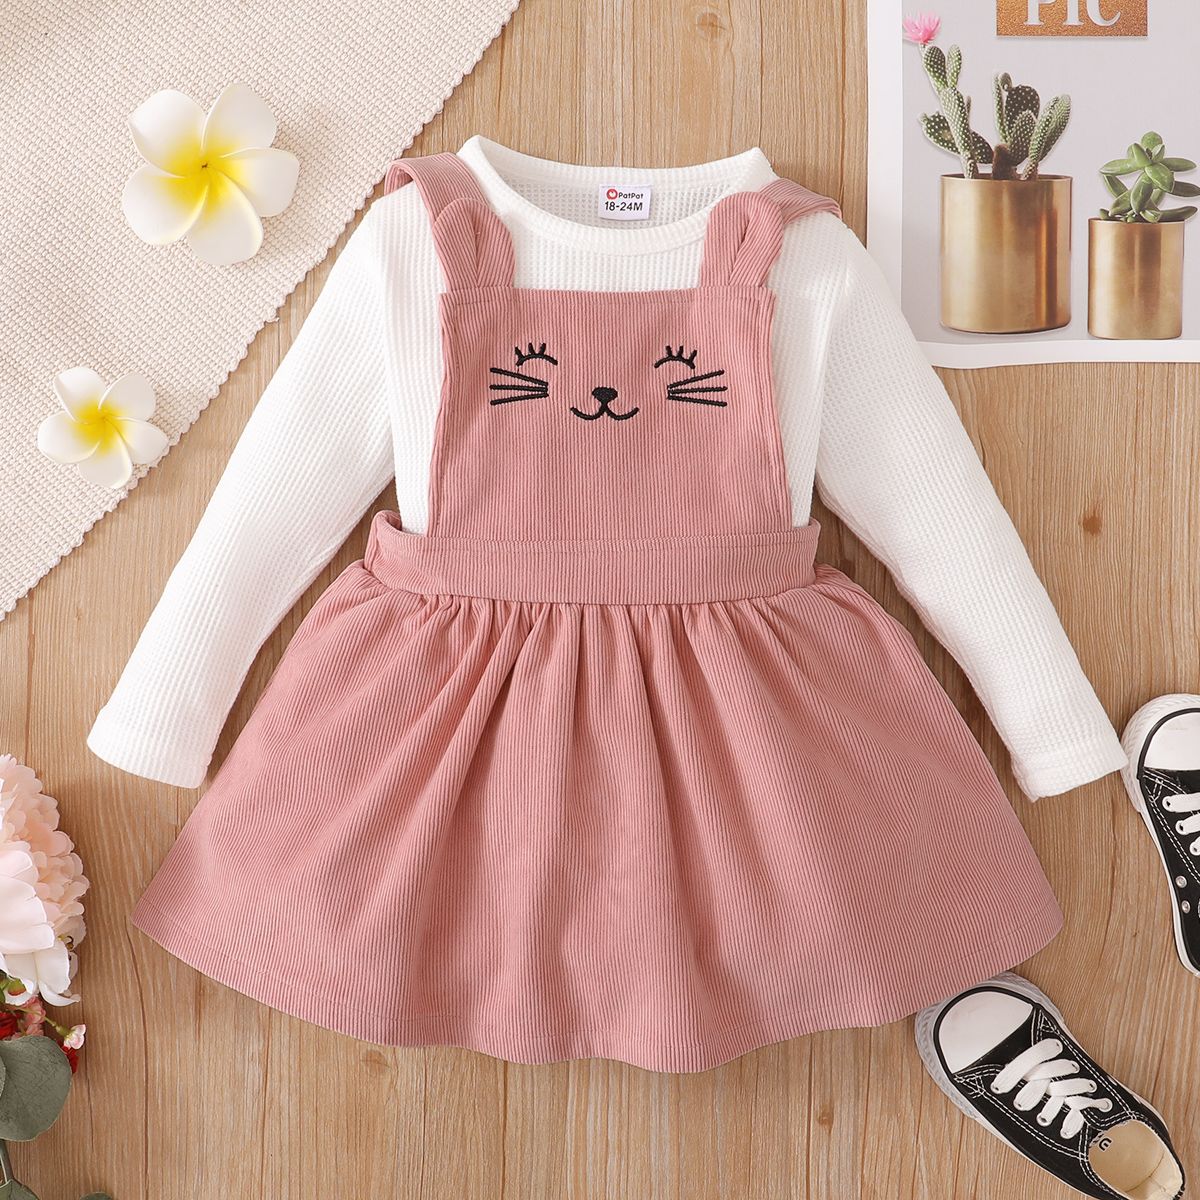 2-piece Toddler Girl Waffle White Top And Cat Embroidered Pink Overall Dress Set